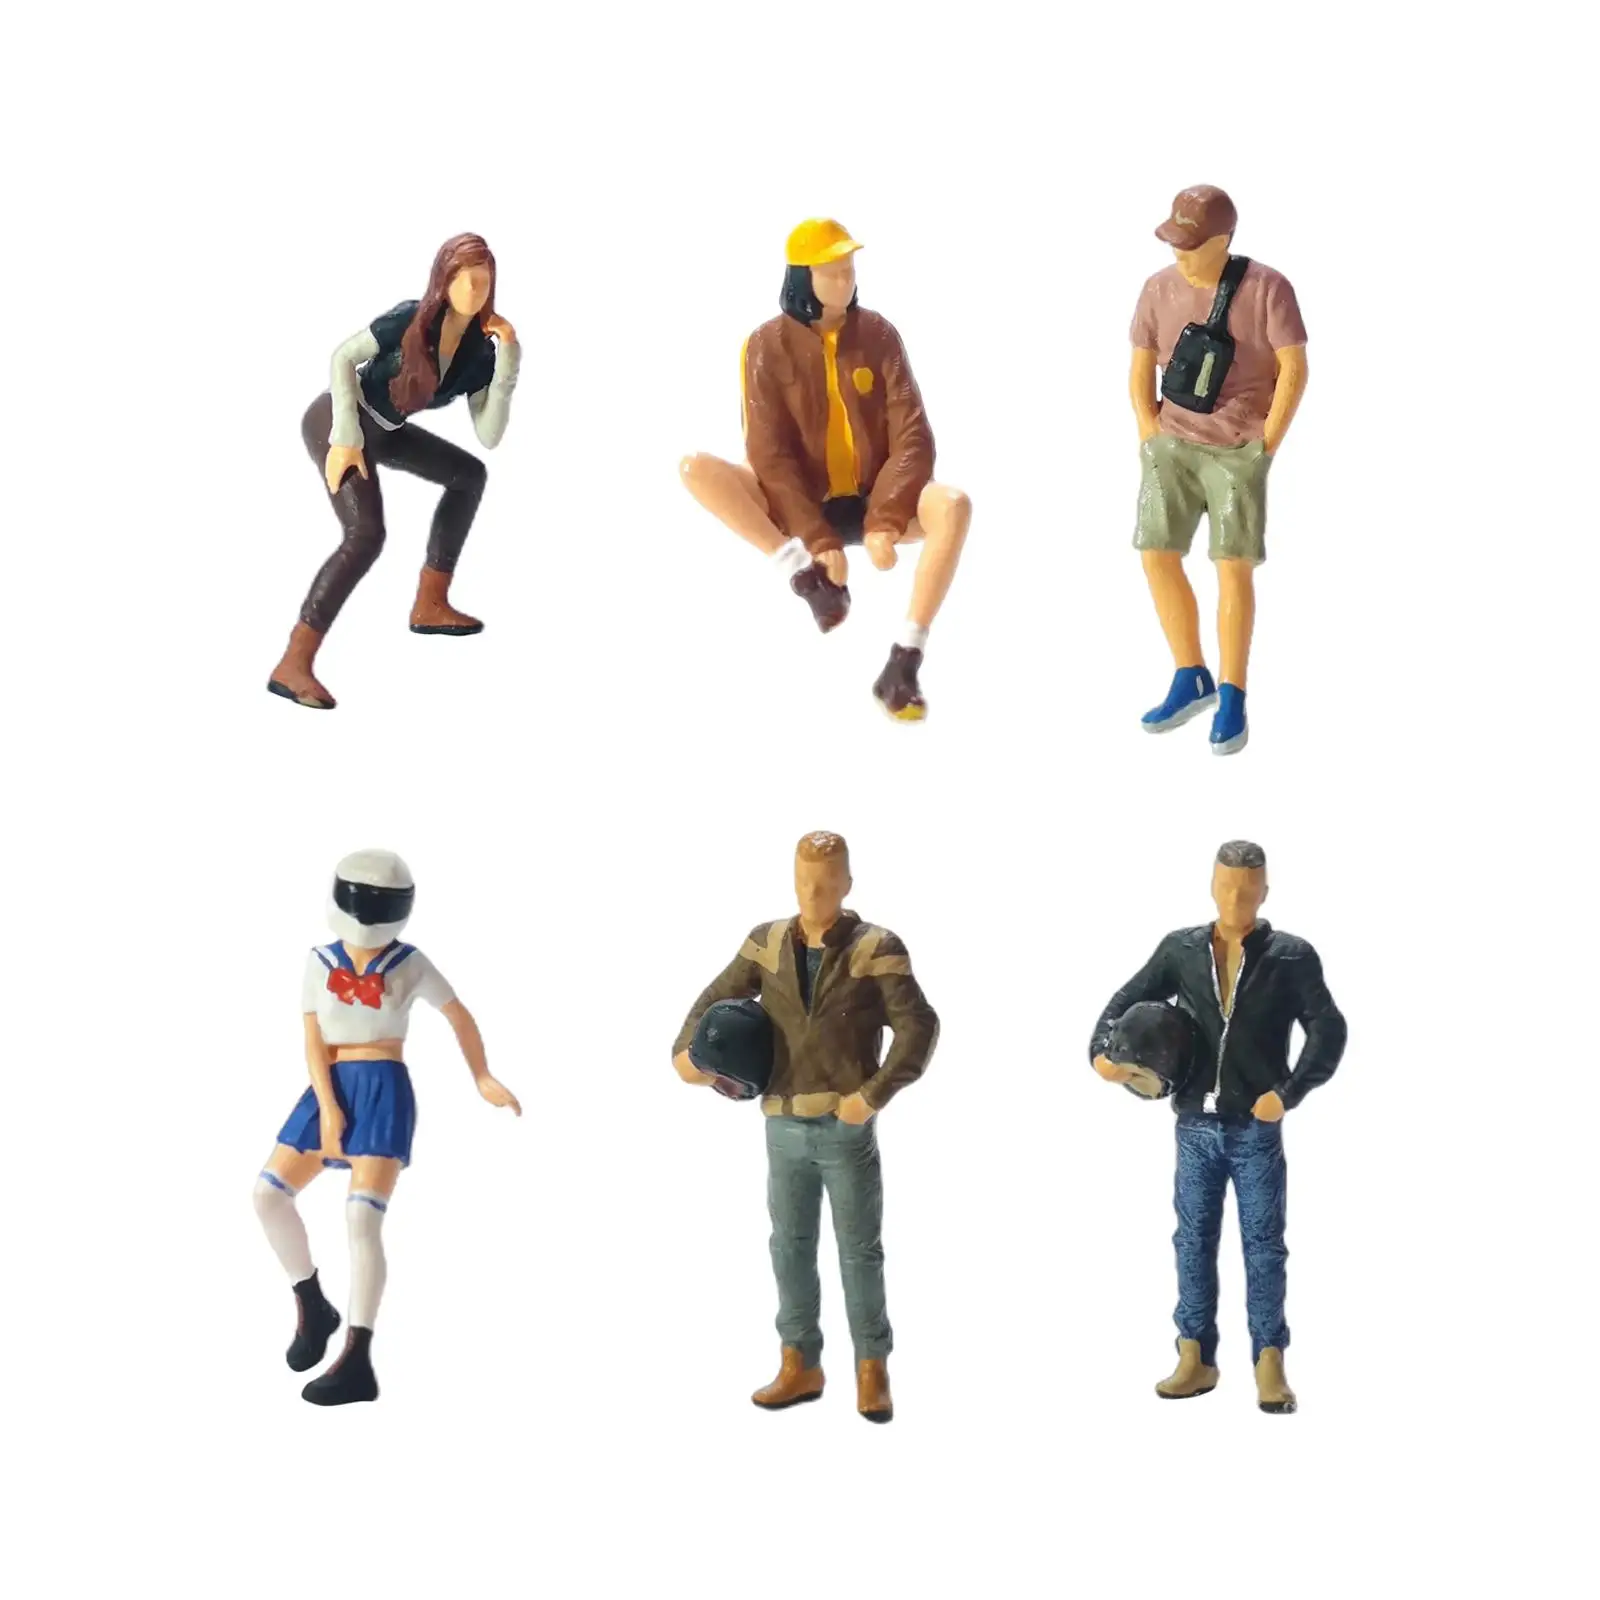 

1/64 Scale Figures DIY Layout Scenery Accs Movie Props 1/64 Model People Figures Micro Landscapes Decor DIY Projects Accessory